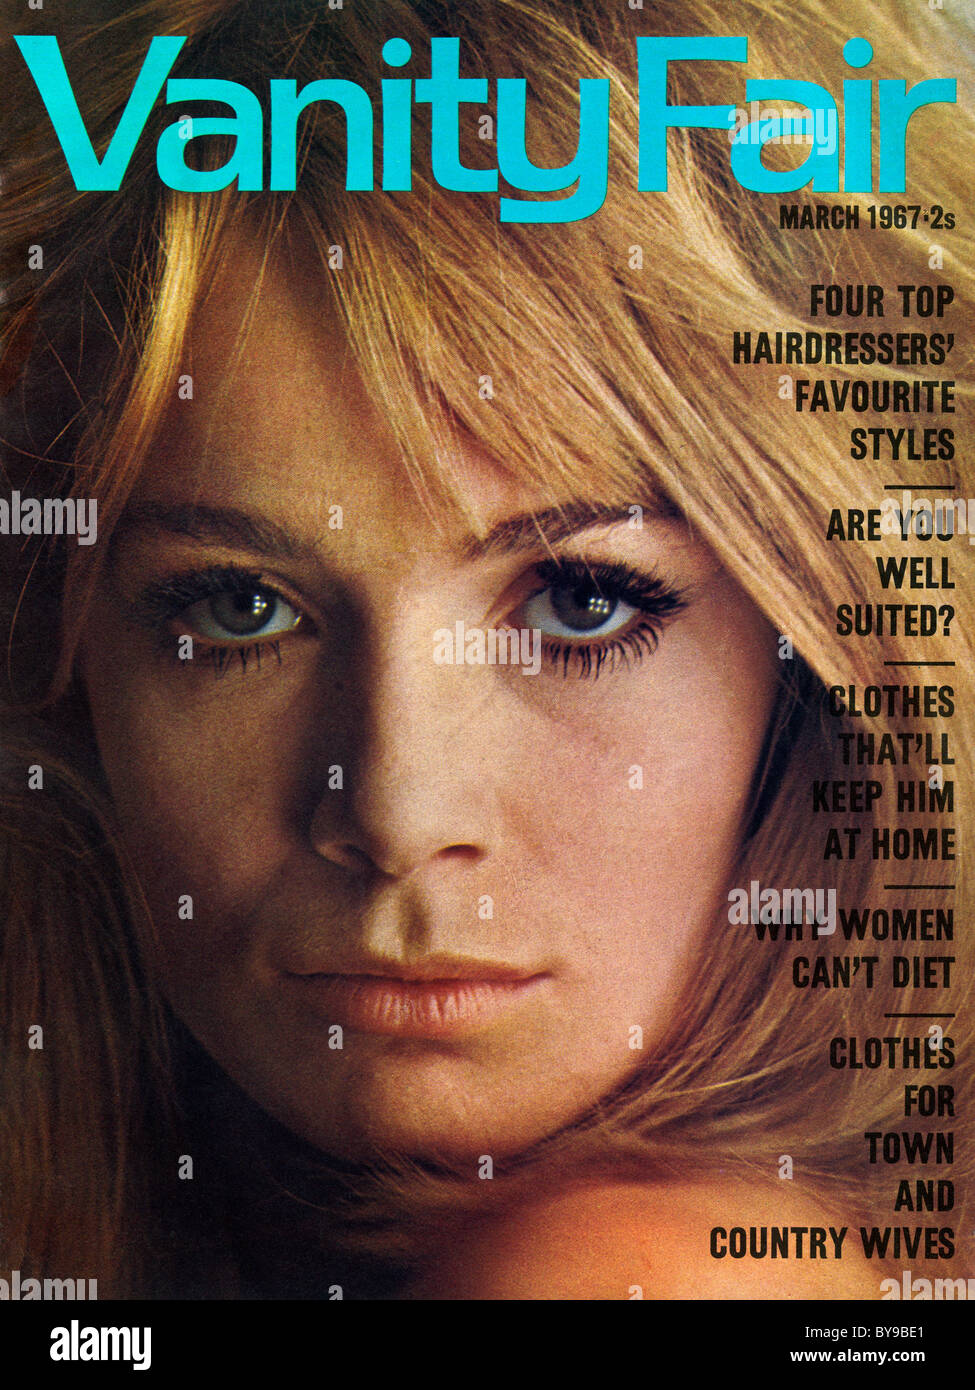 Cover of VANITY FAIR magazine dated March 1967 priced at 2